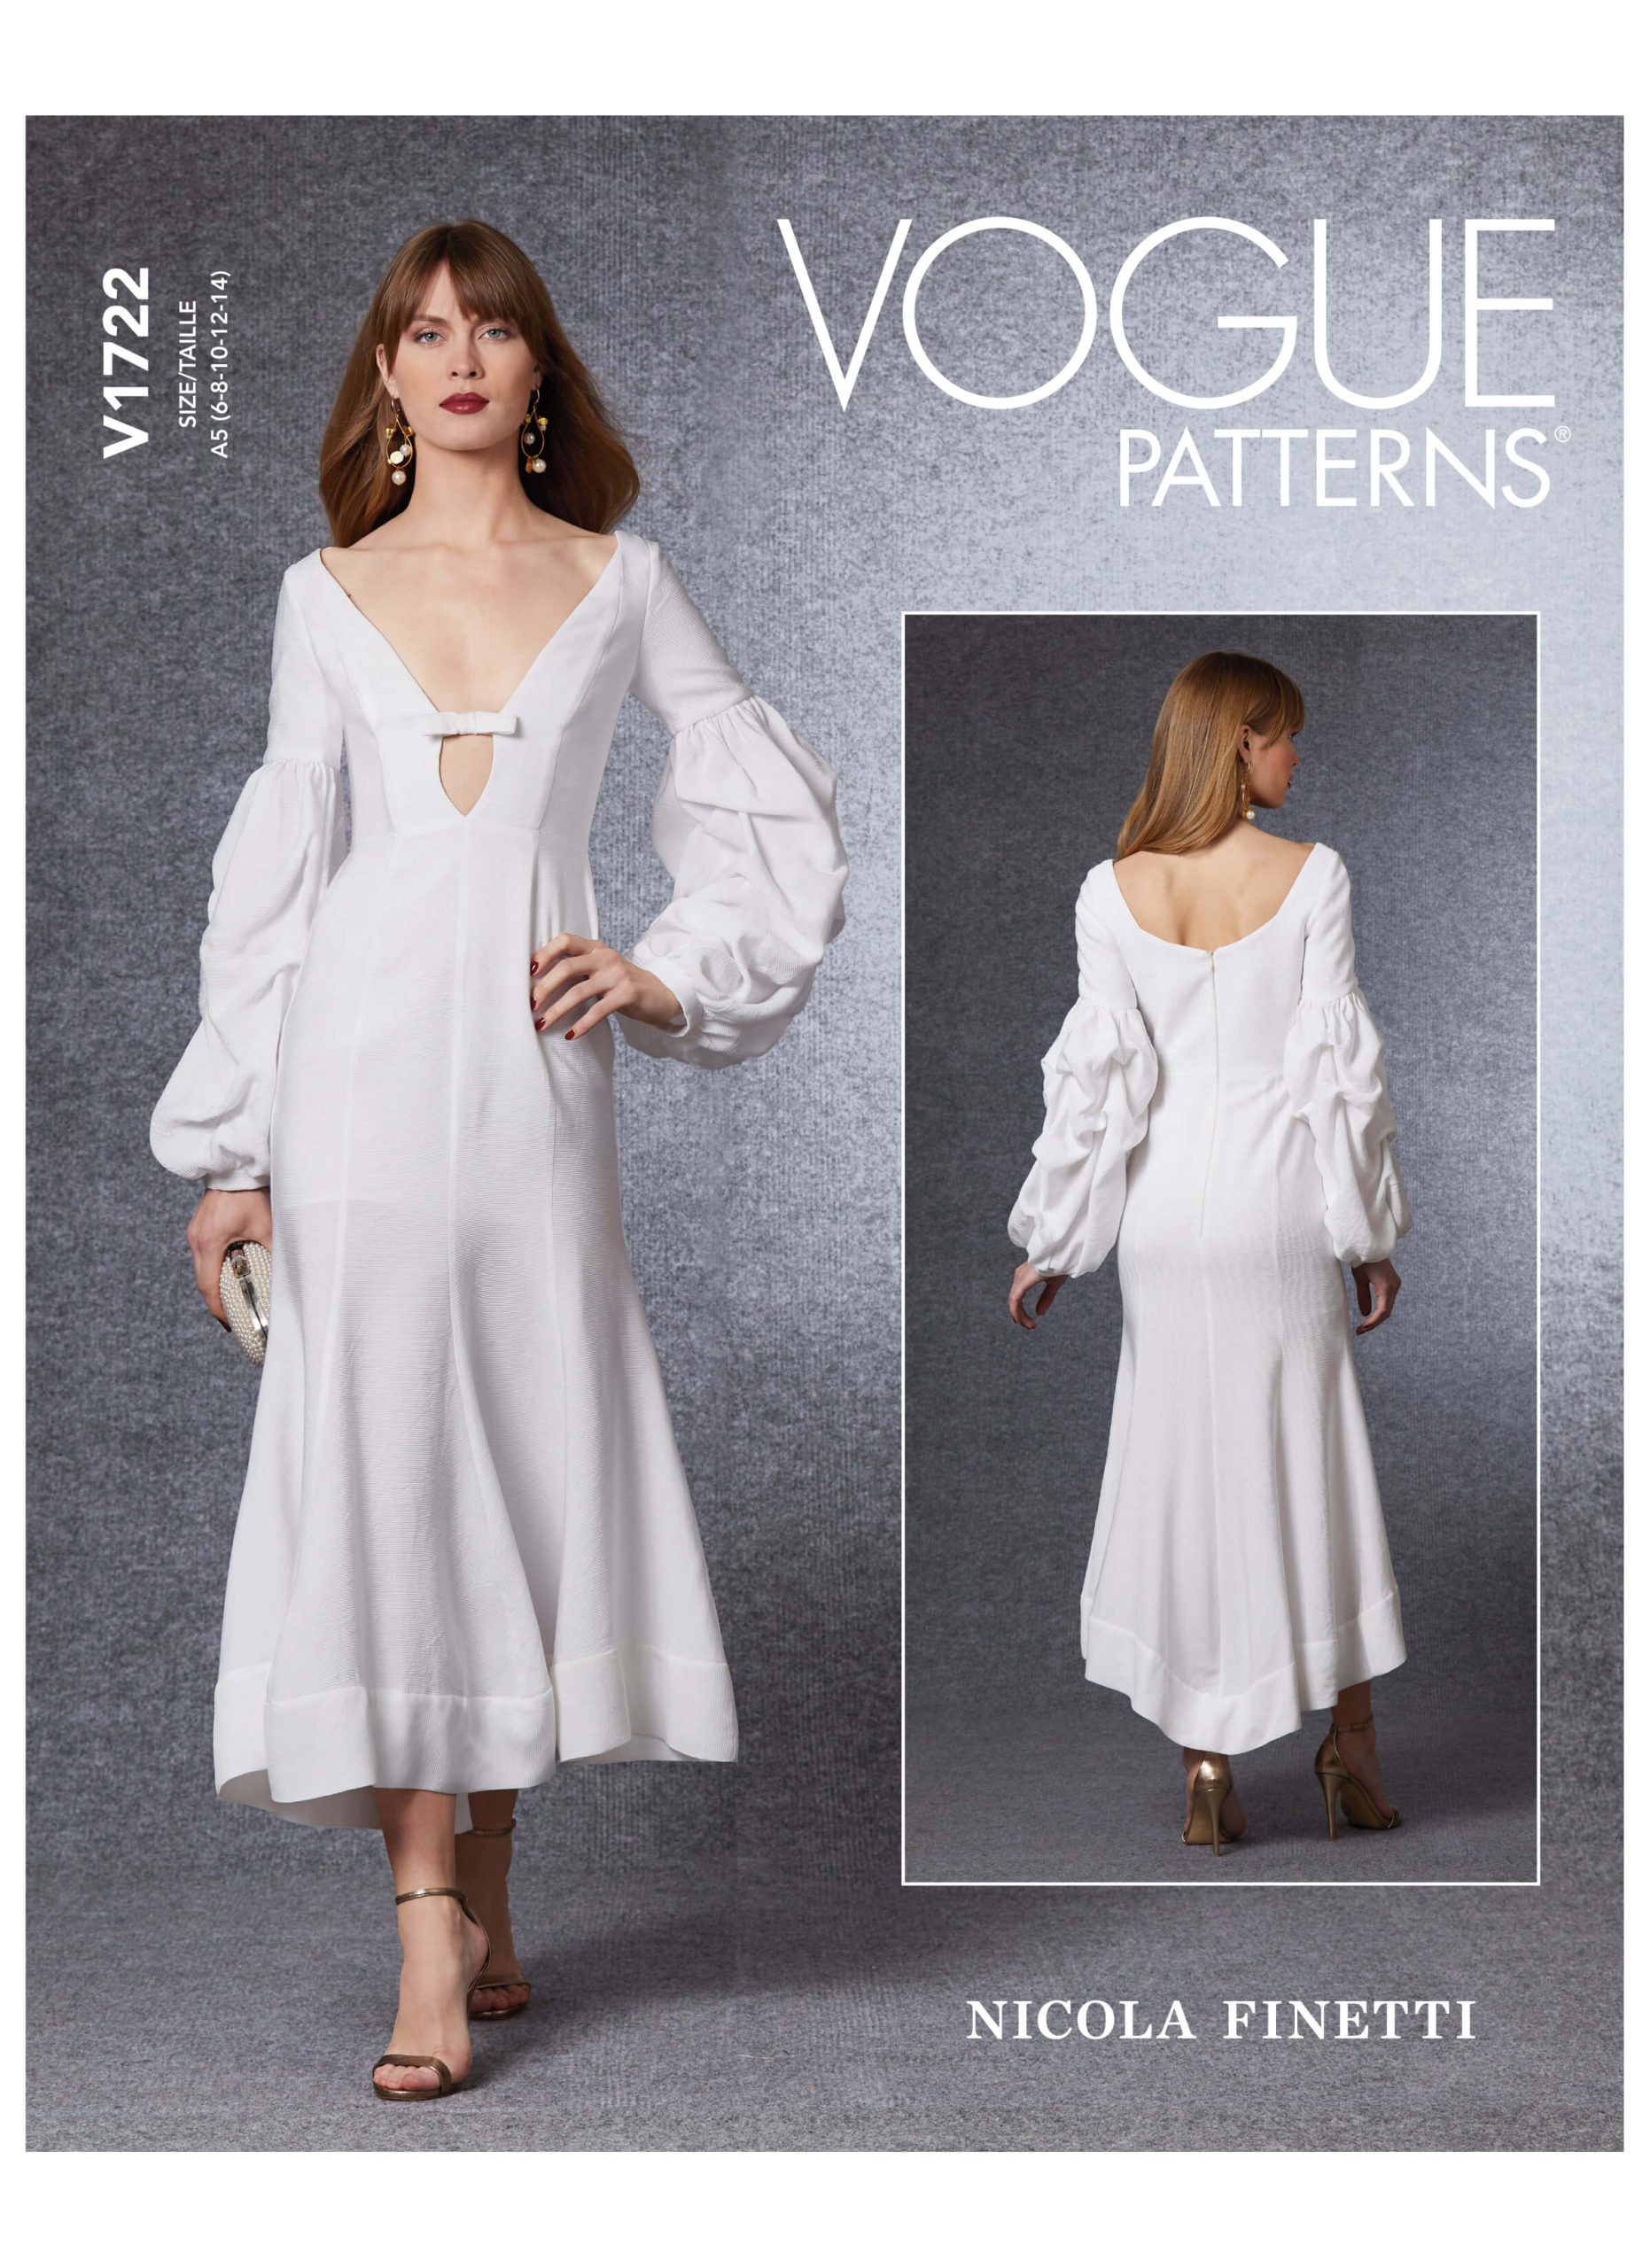 Vogue Patterns V1722 Misses' Special Occasion Dress Nicola Finetti